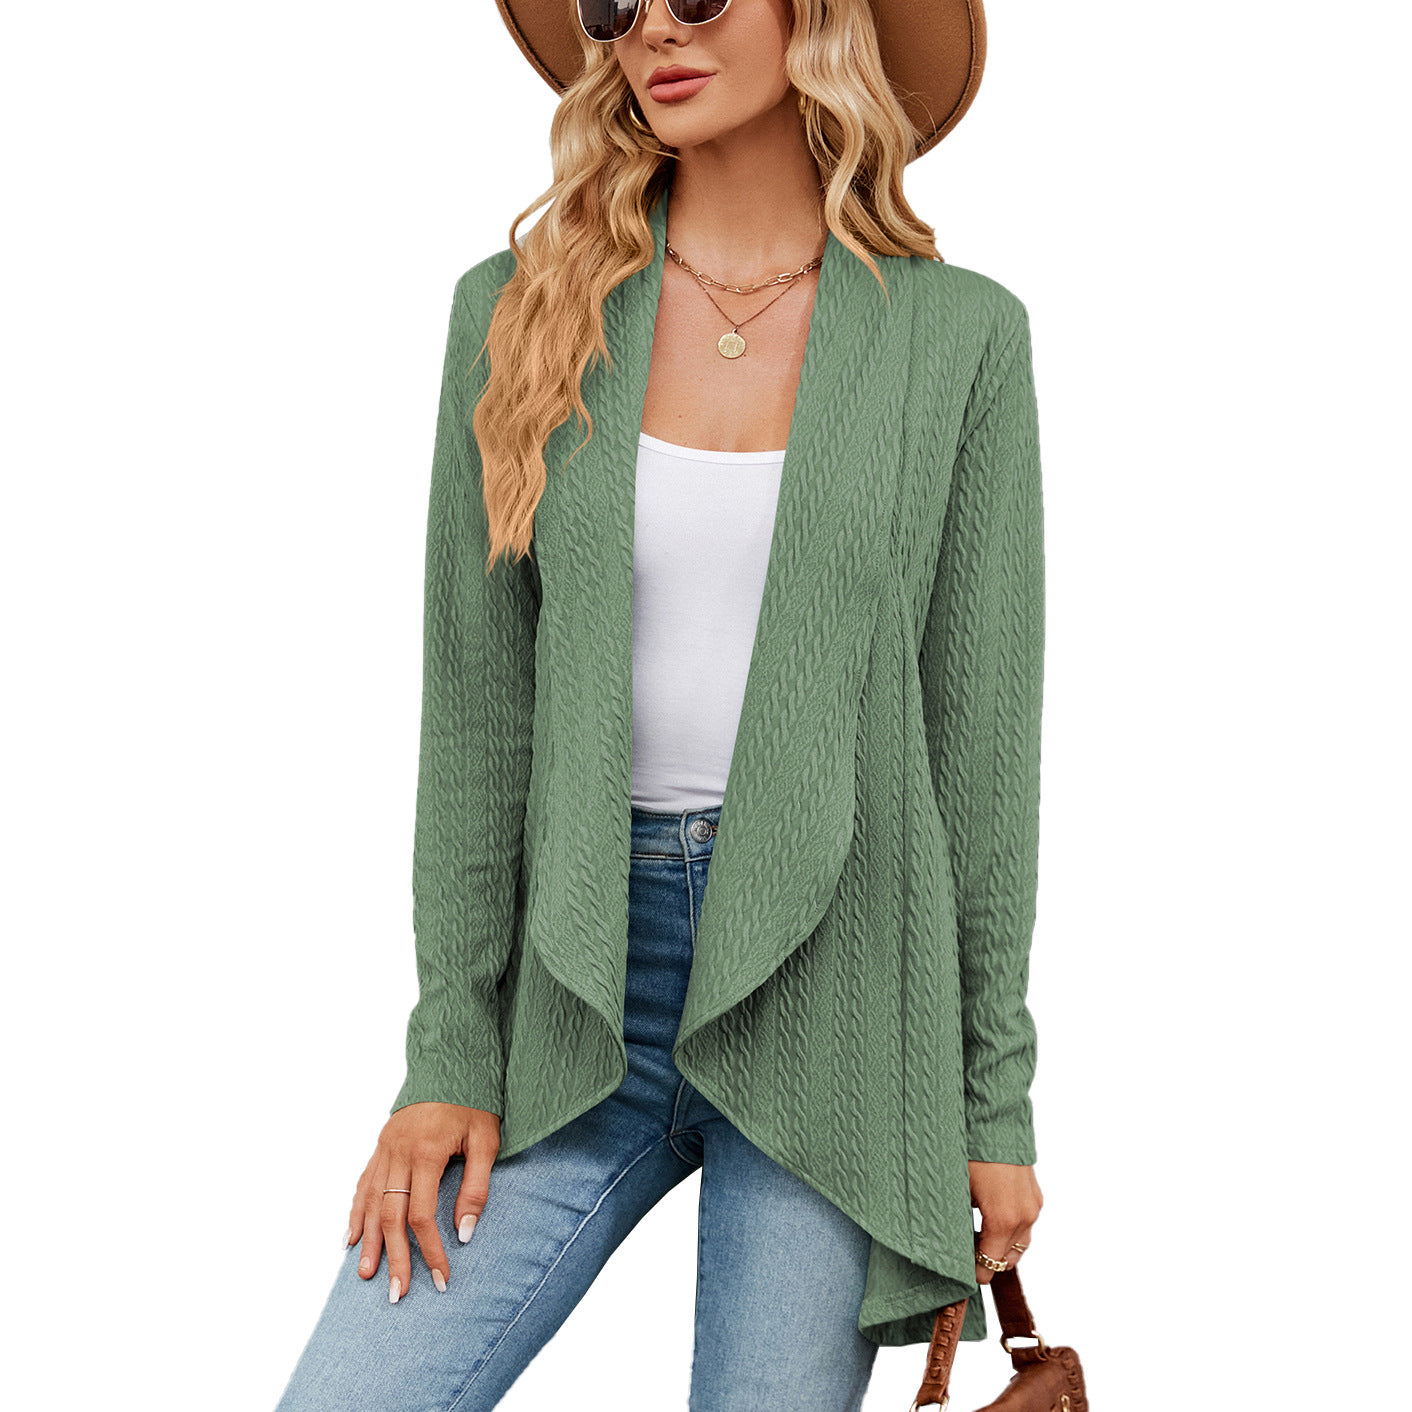 Women's Long Sleeve Sweater Solid Color Loose Cardigan Knitted Jacket